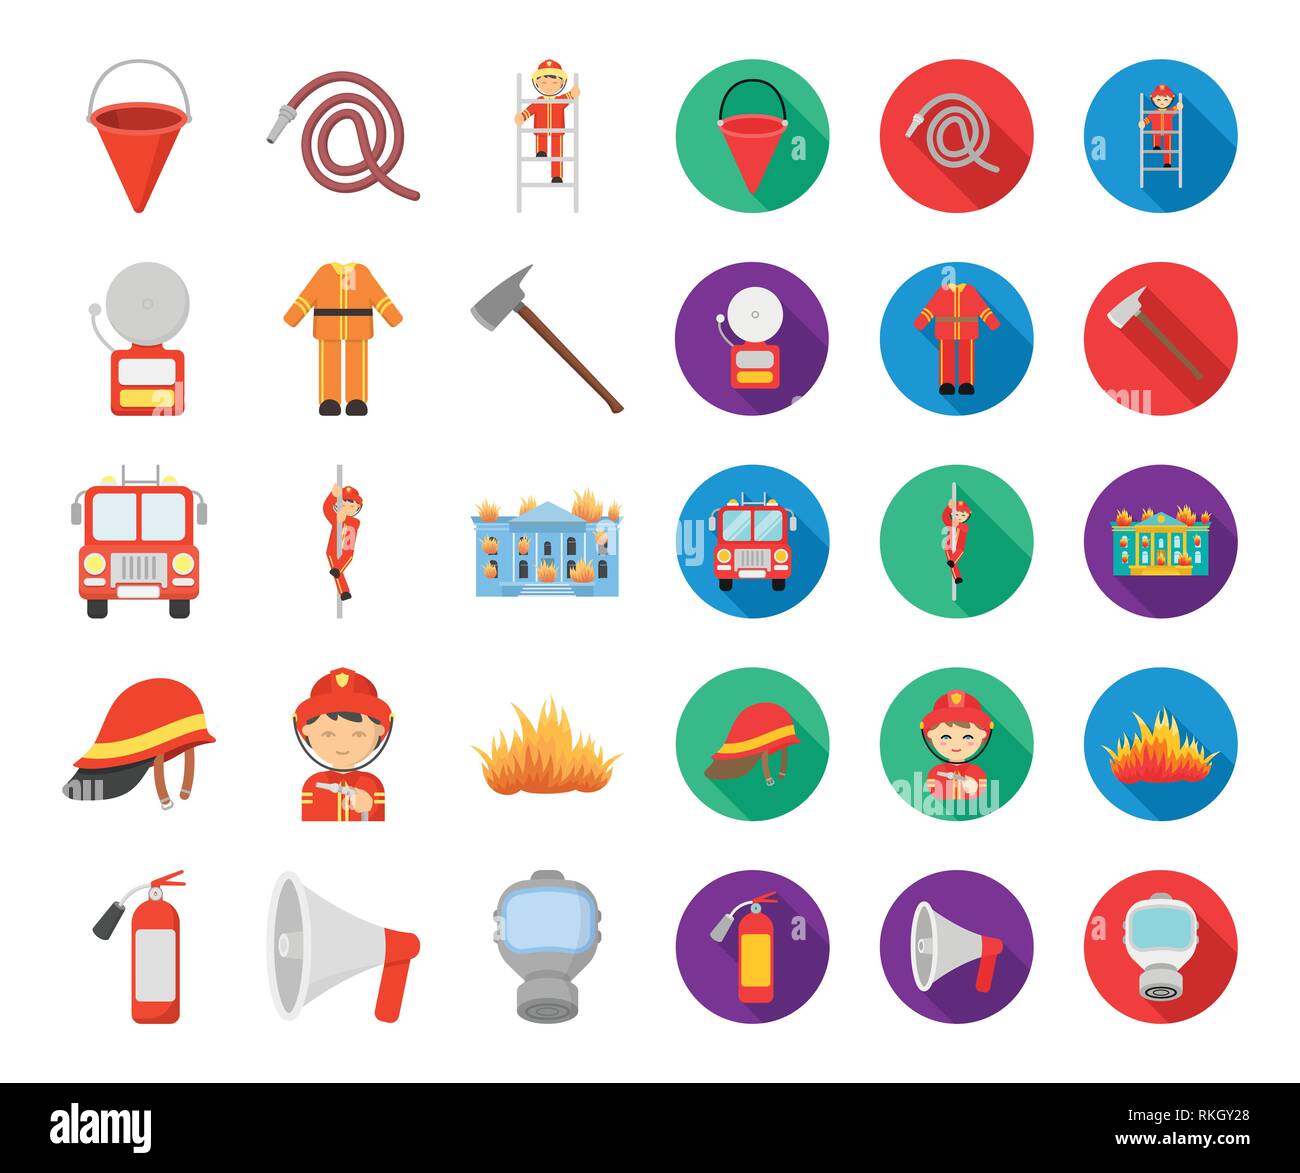 accessories,apparatus,art,attribute,axe,bucket,building,bunker,cartoon,flat,collection,conical,department,design,equipment,extinguishing,extingushier,fire,firefighter,firefighting,flame,gas,gear,helmet,icon,illustration,isolated,logo,mask,organization,pike,pole,pump,ring,separation,service,set,sign,slide,symbol,tools,vector,web Vector Vectors , Stock Vector